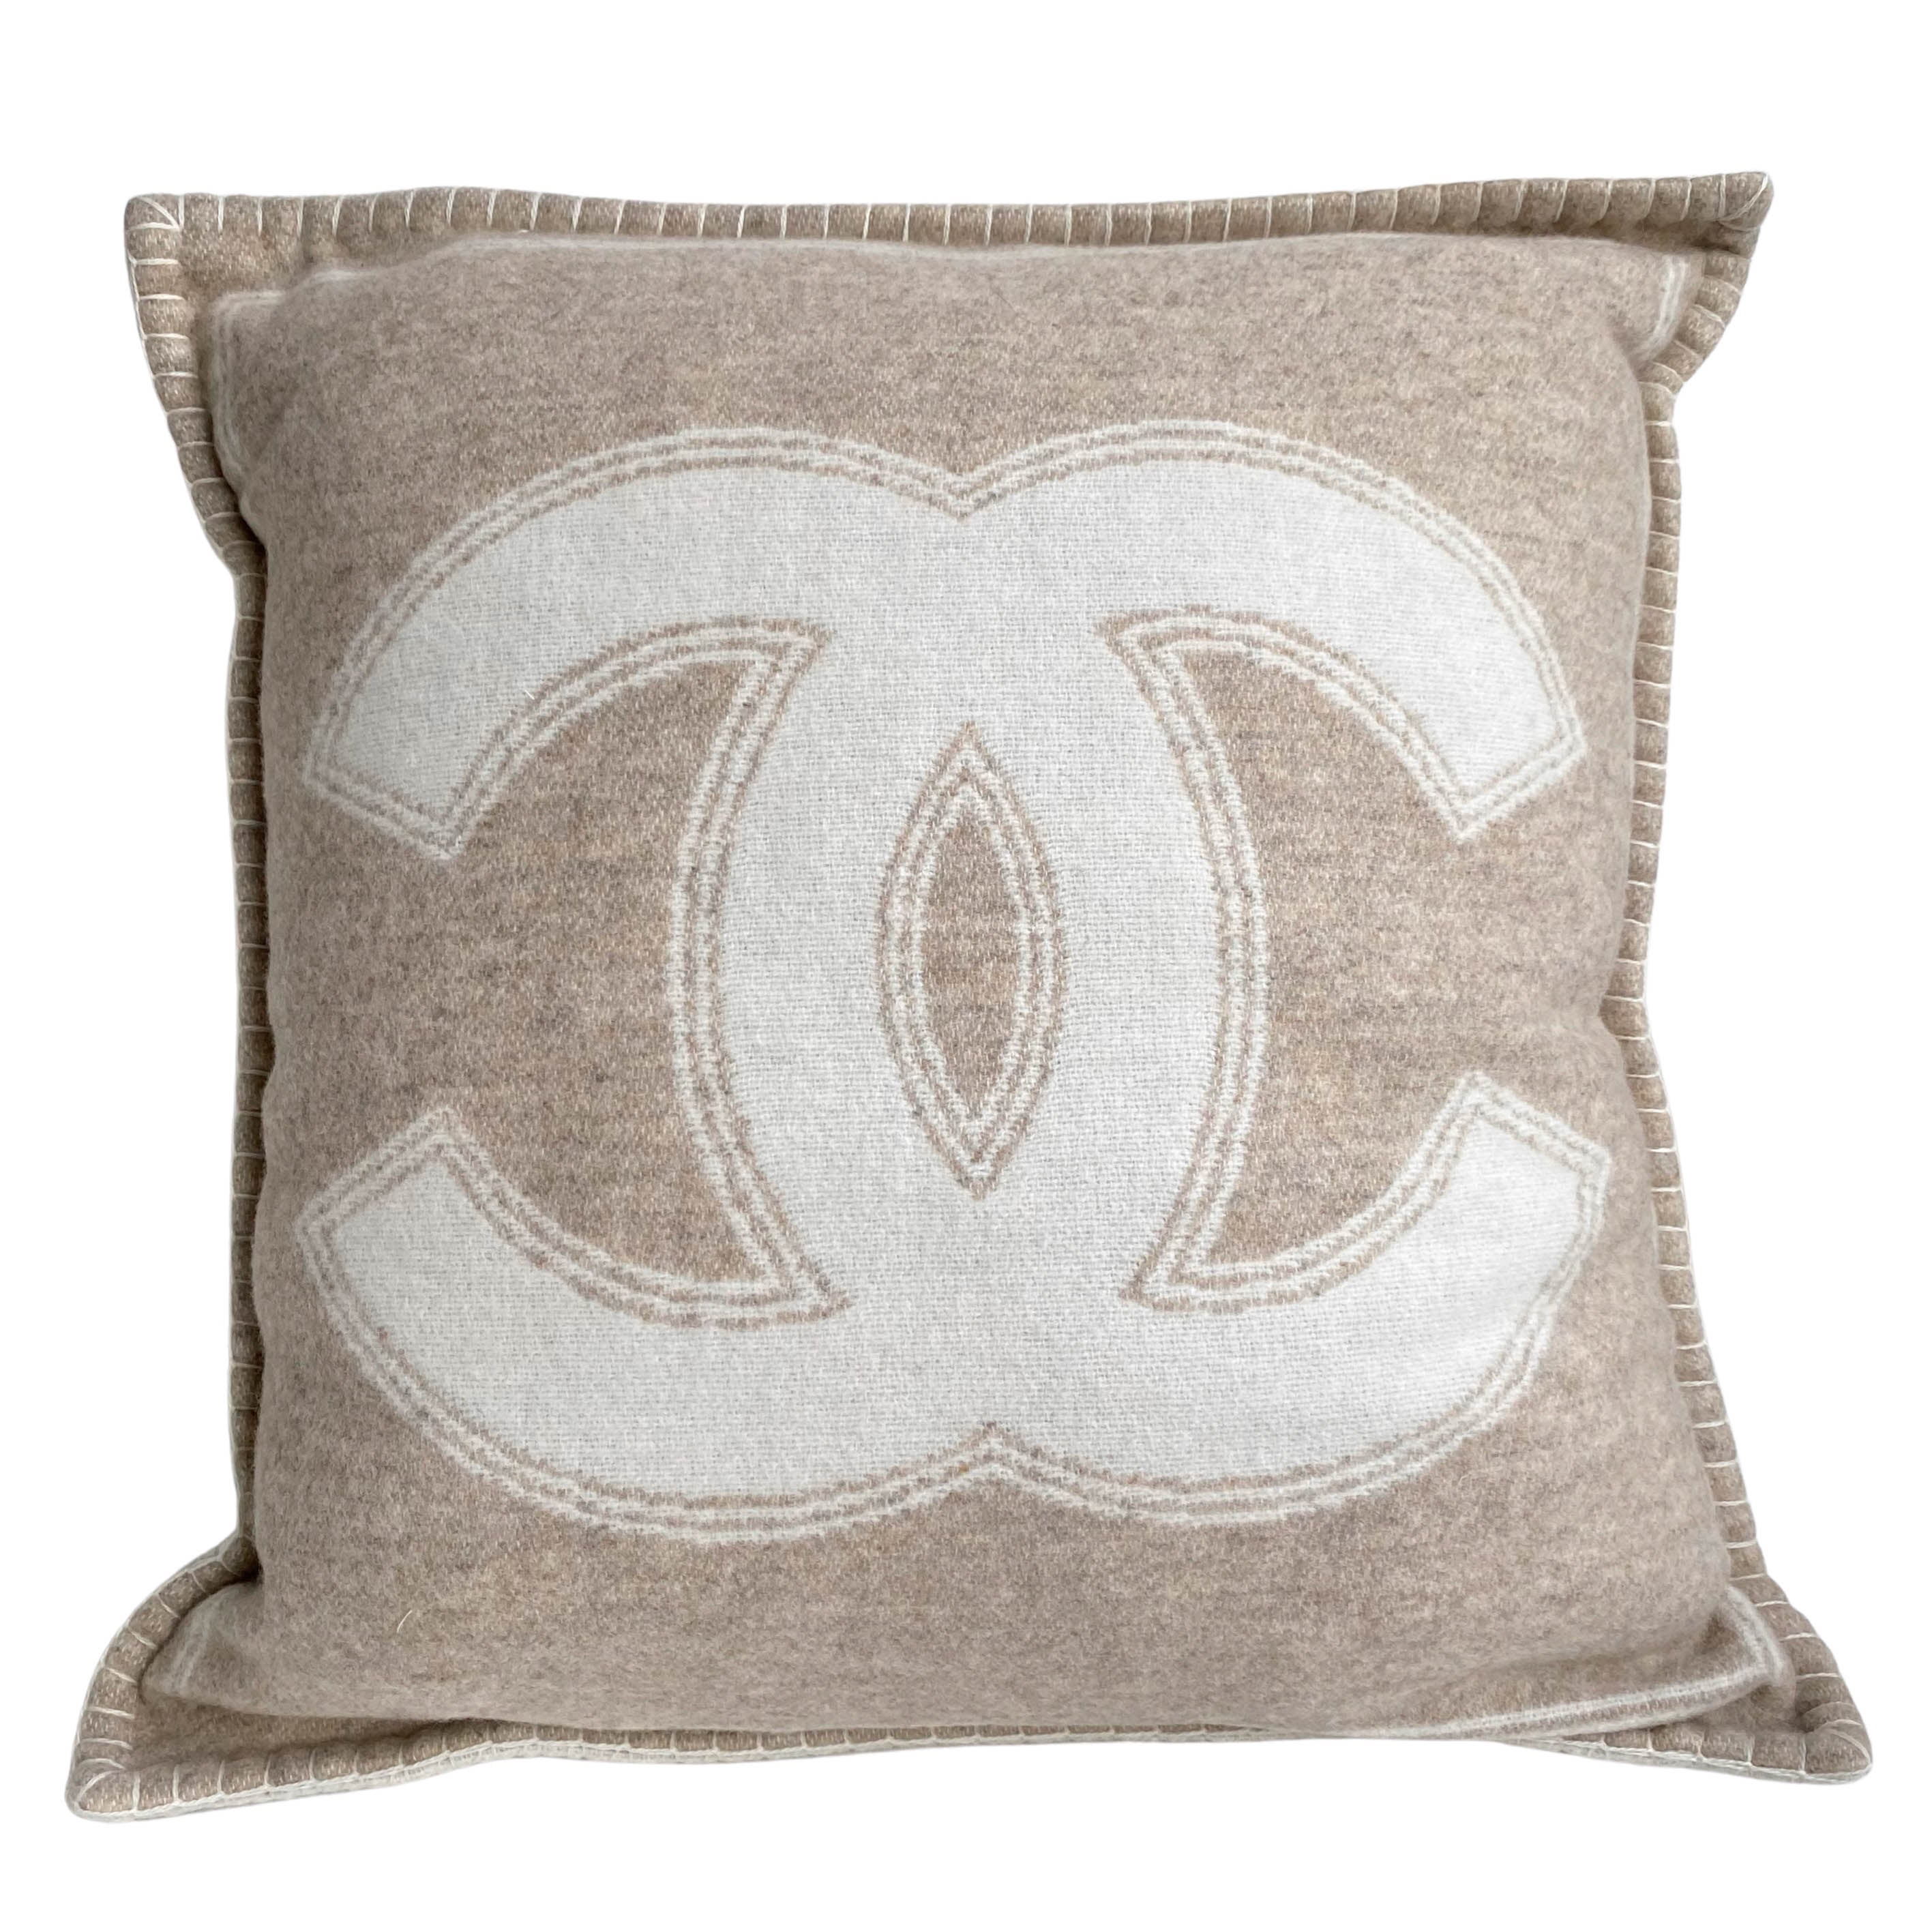 Coco Chanel Hot Pink Pillow - REVER LAVIE